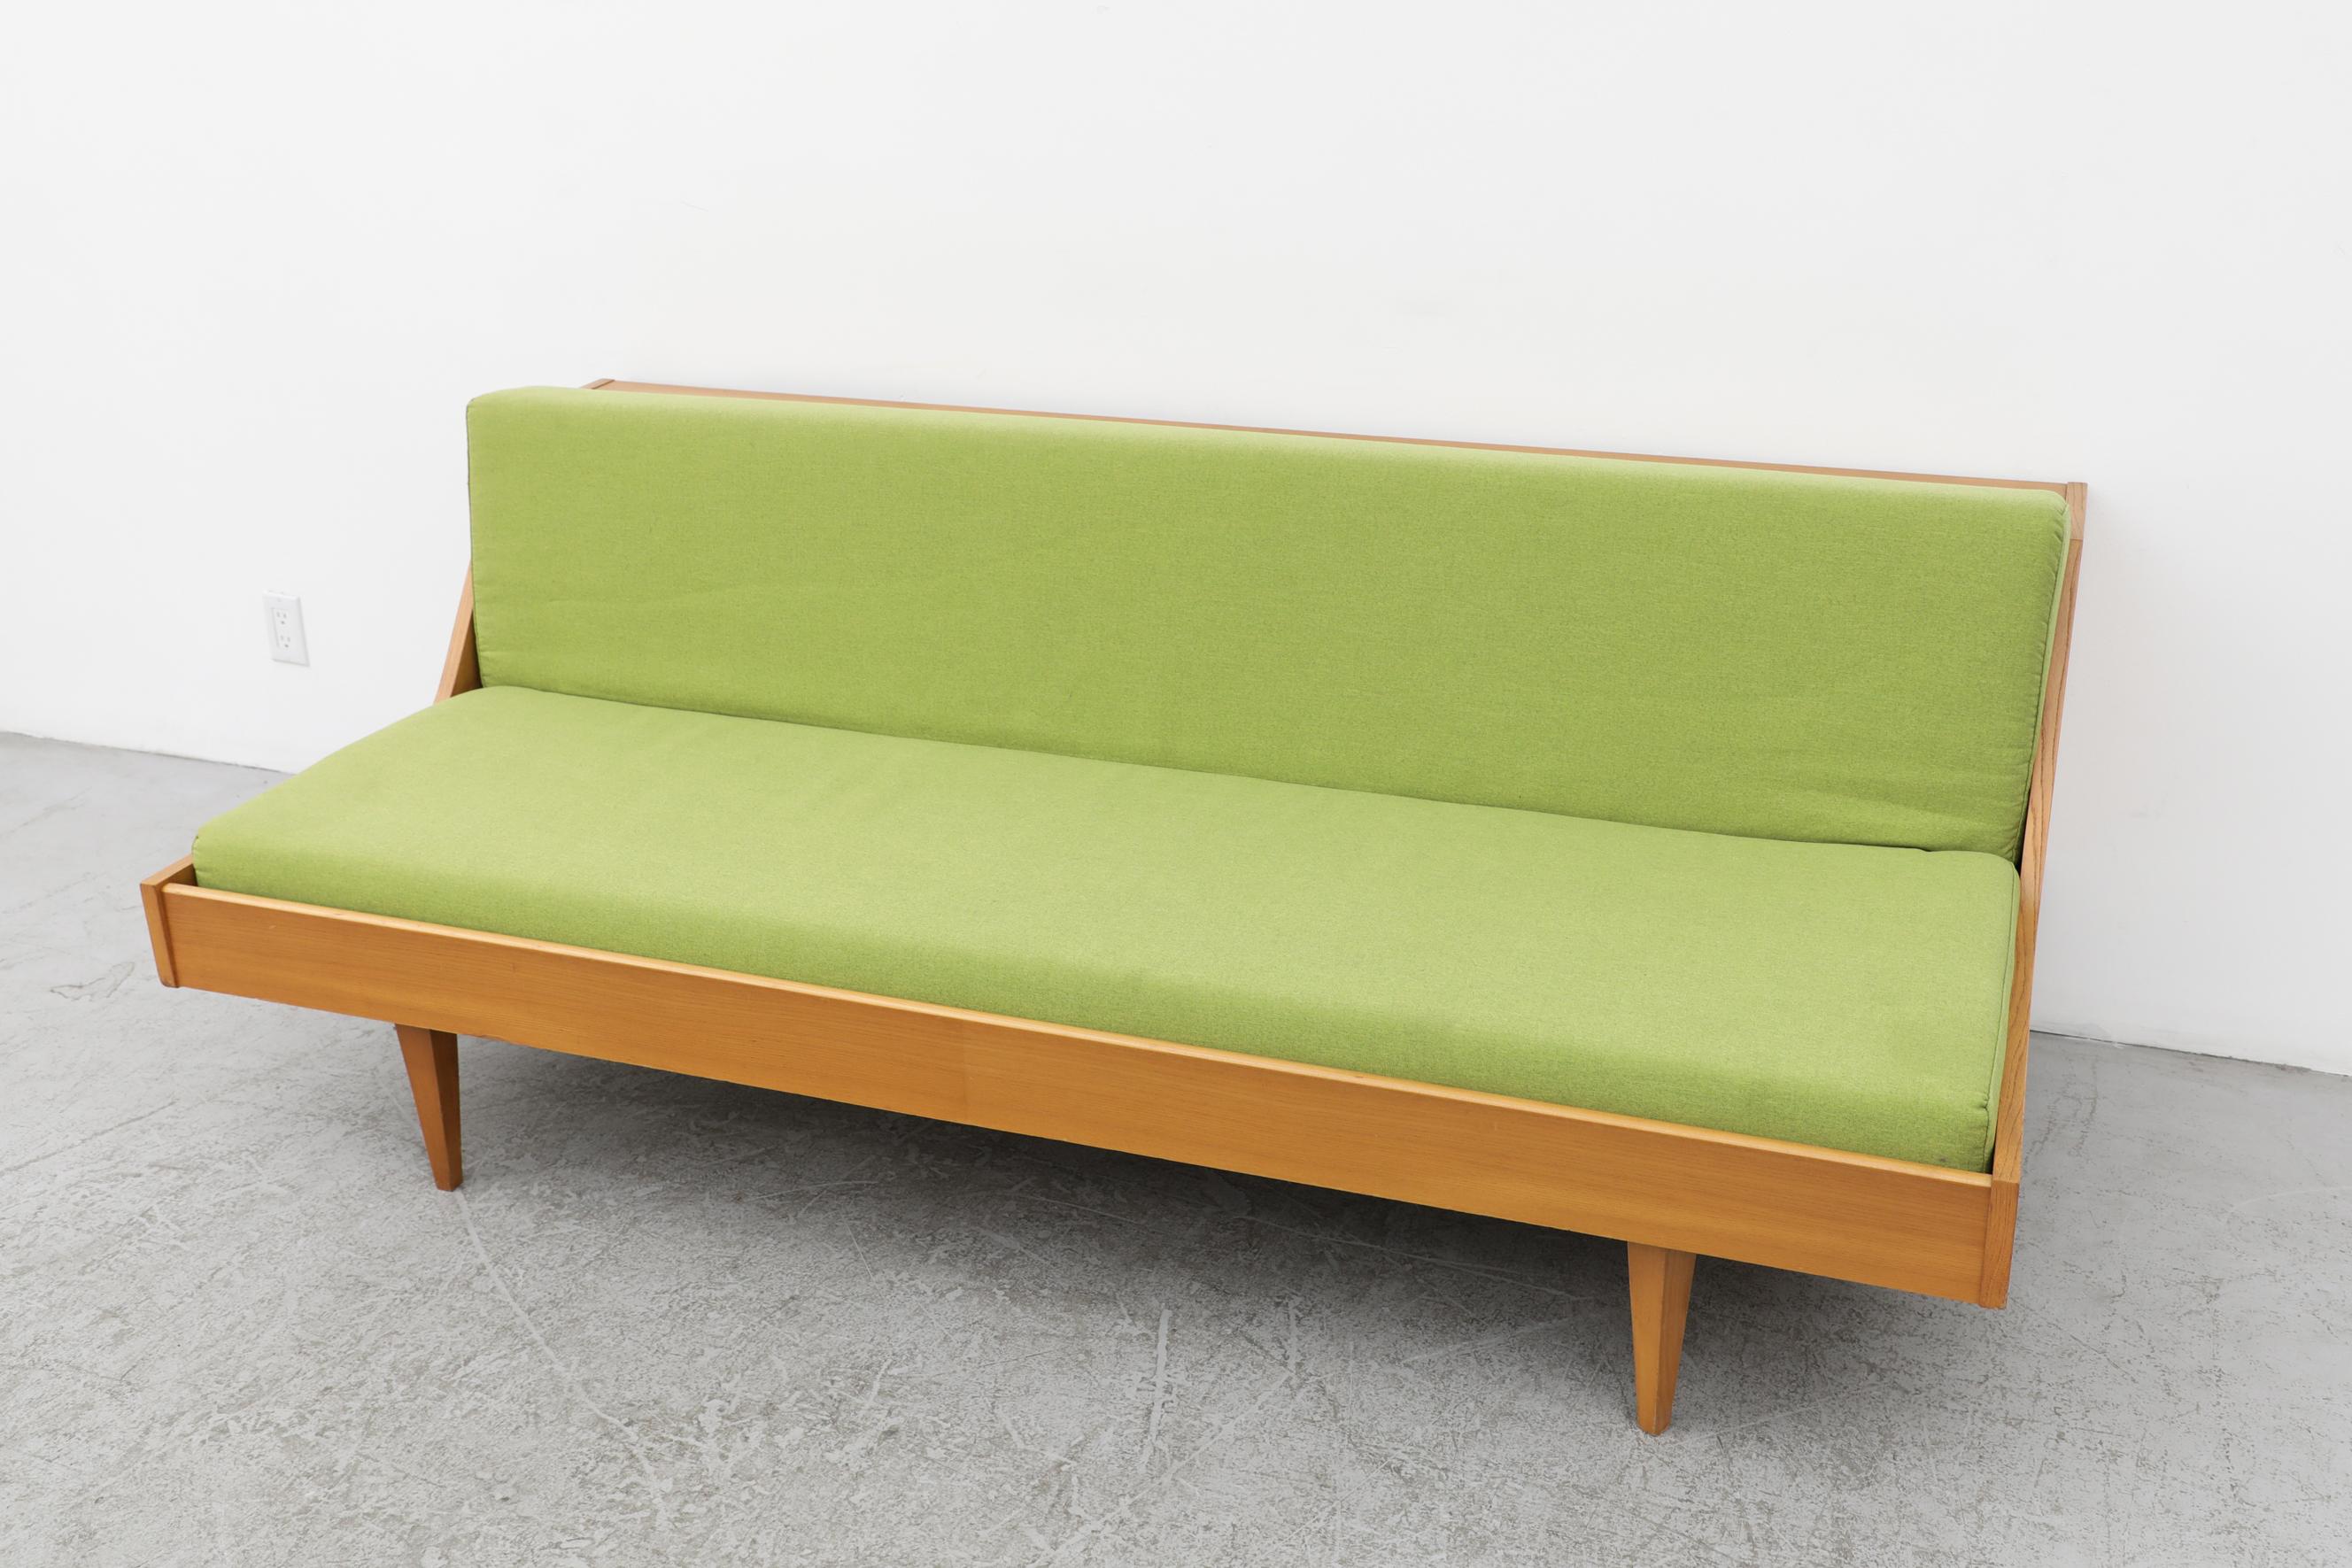 Hans Wegner attributed Model GE 258 for Getama sleeper sofa with kiwi green upholstery. The backrest can be raised, giving you added storage space for pillows and blankets, but it can also turns into a sleeper sofa. The backboard has some interior